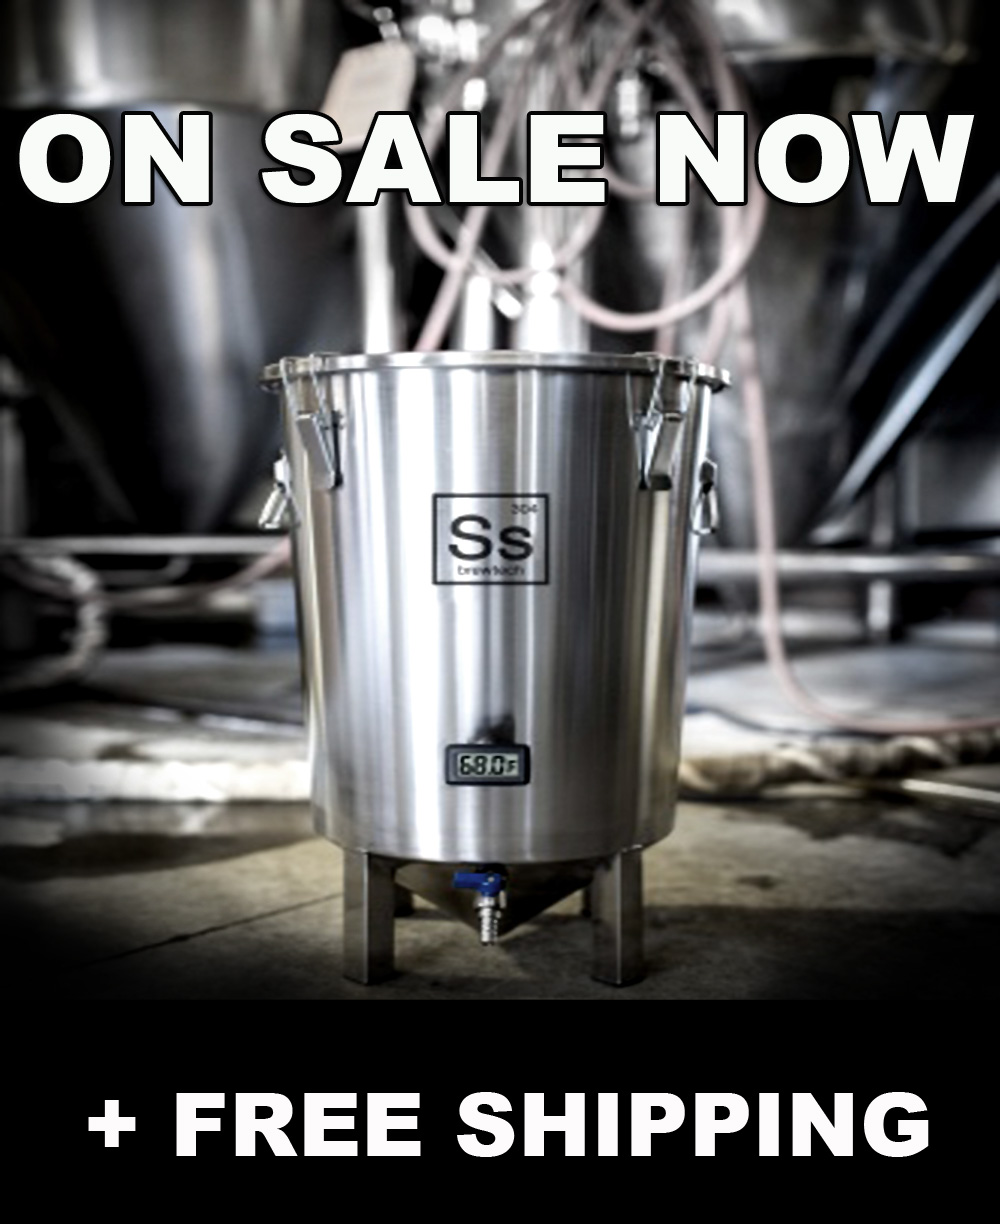  Home Brewer Promo Code for Get A New 7 Gallon Stainless Fermenter for $229 and FREE SHIPPING Coupon Code